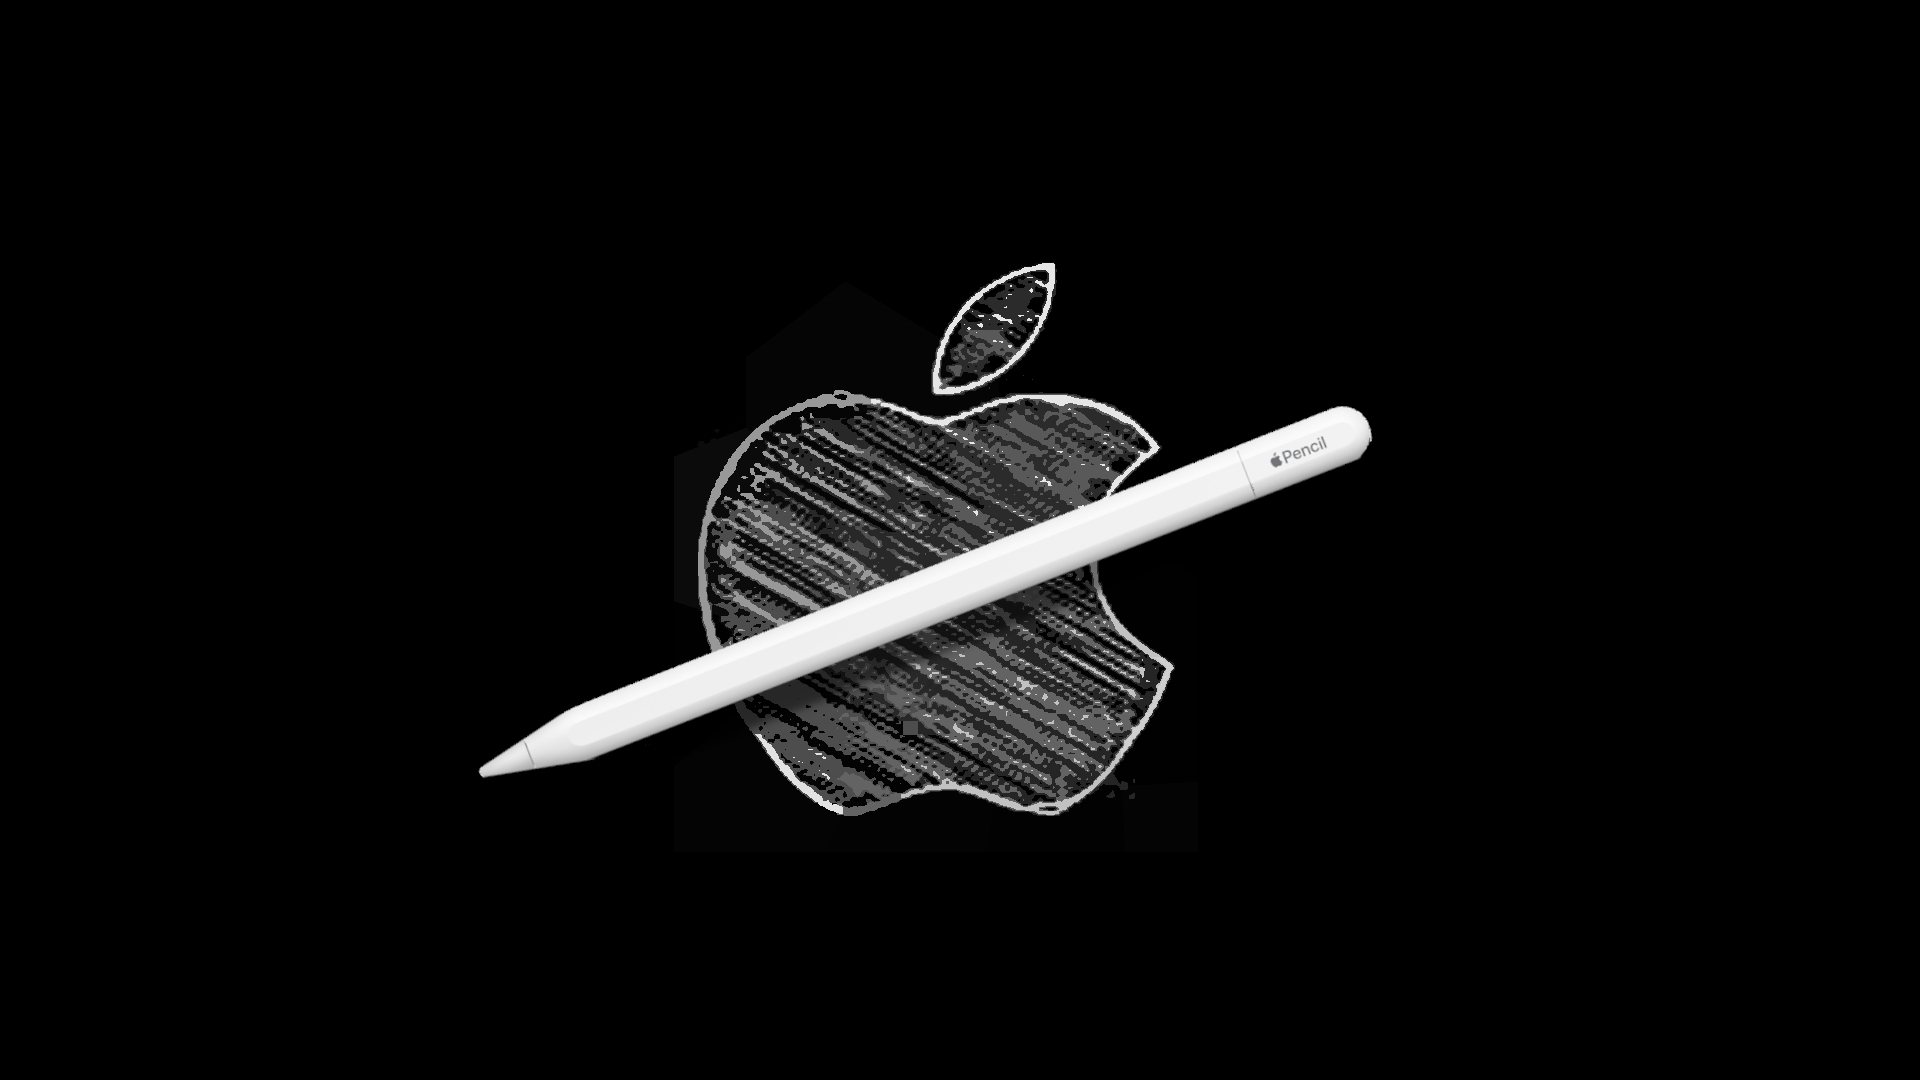 New $79 Apple Pencil with USB-C port announced